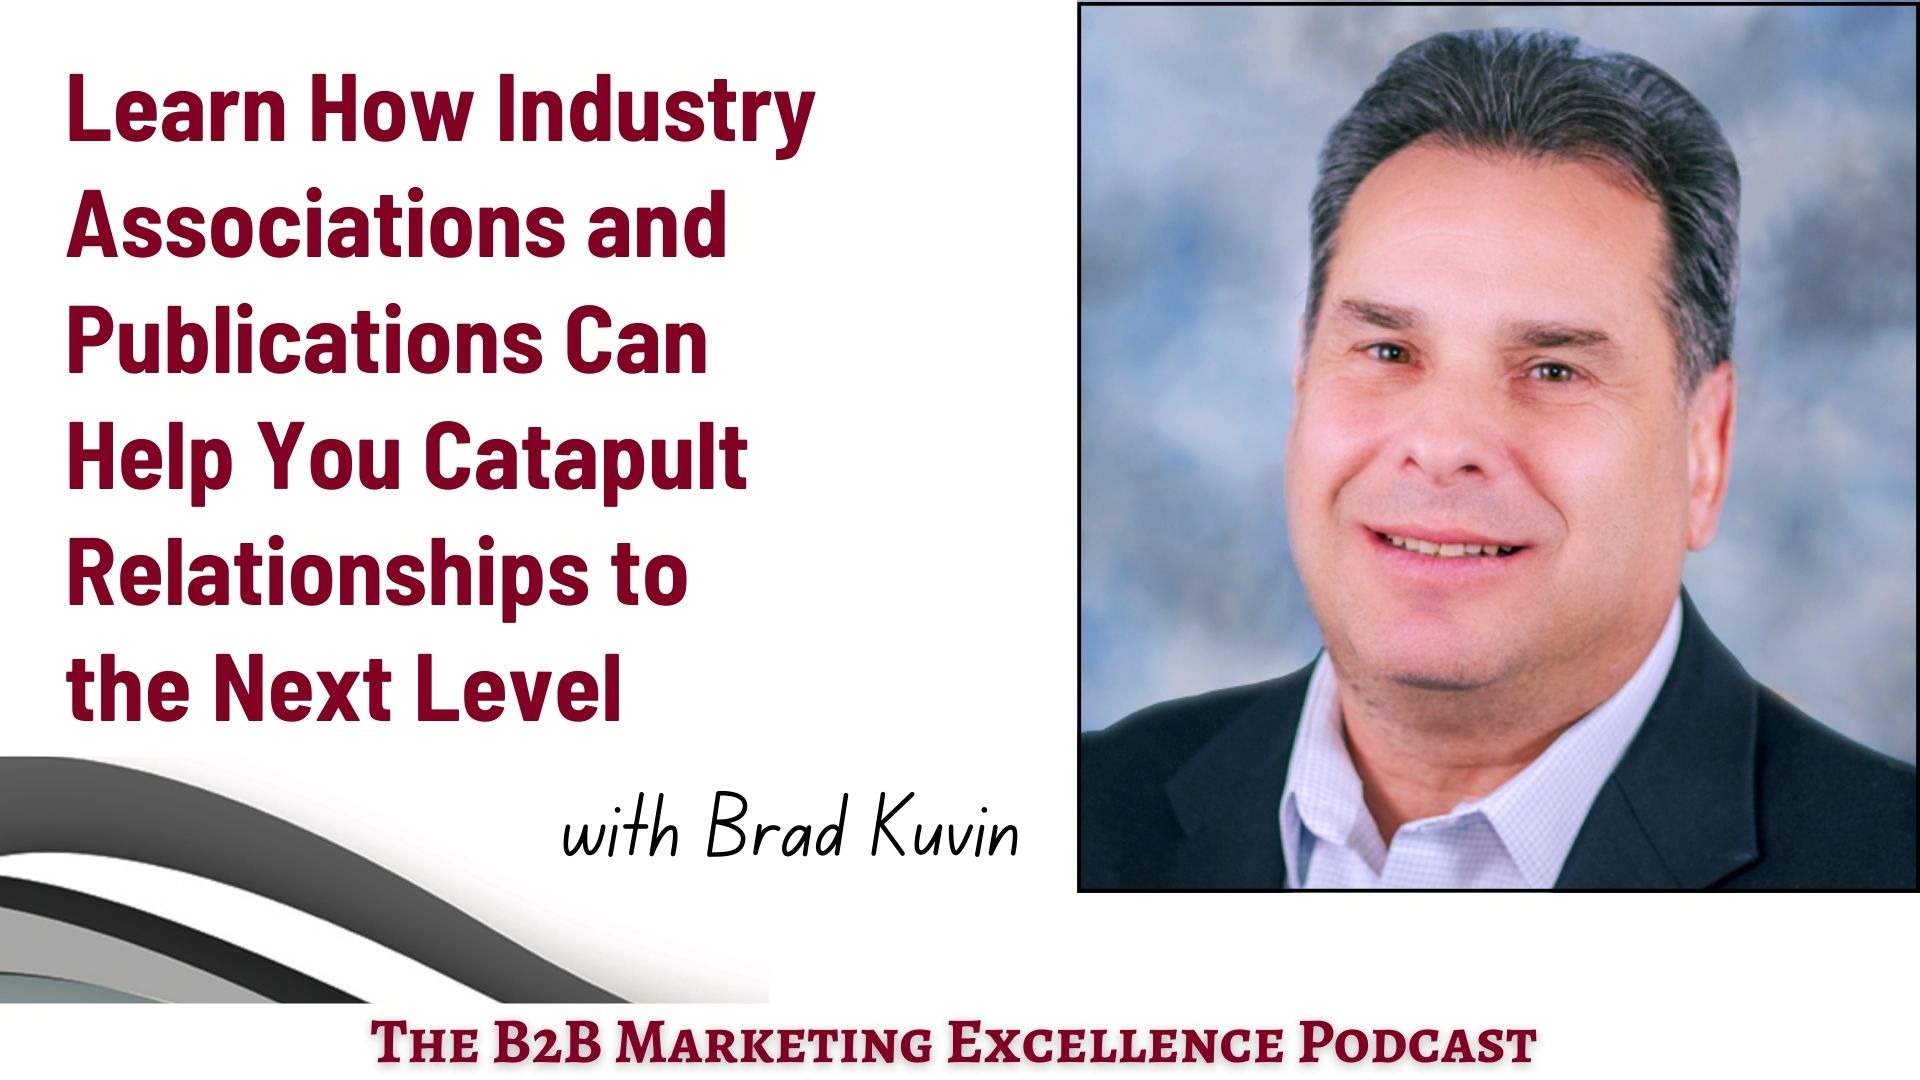 How Industry Associations and Publications Can Help You Catapult Relationships to the Next Level